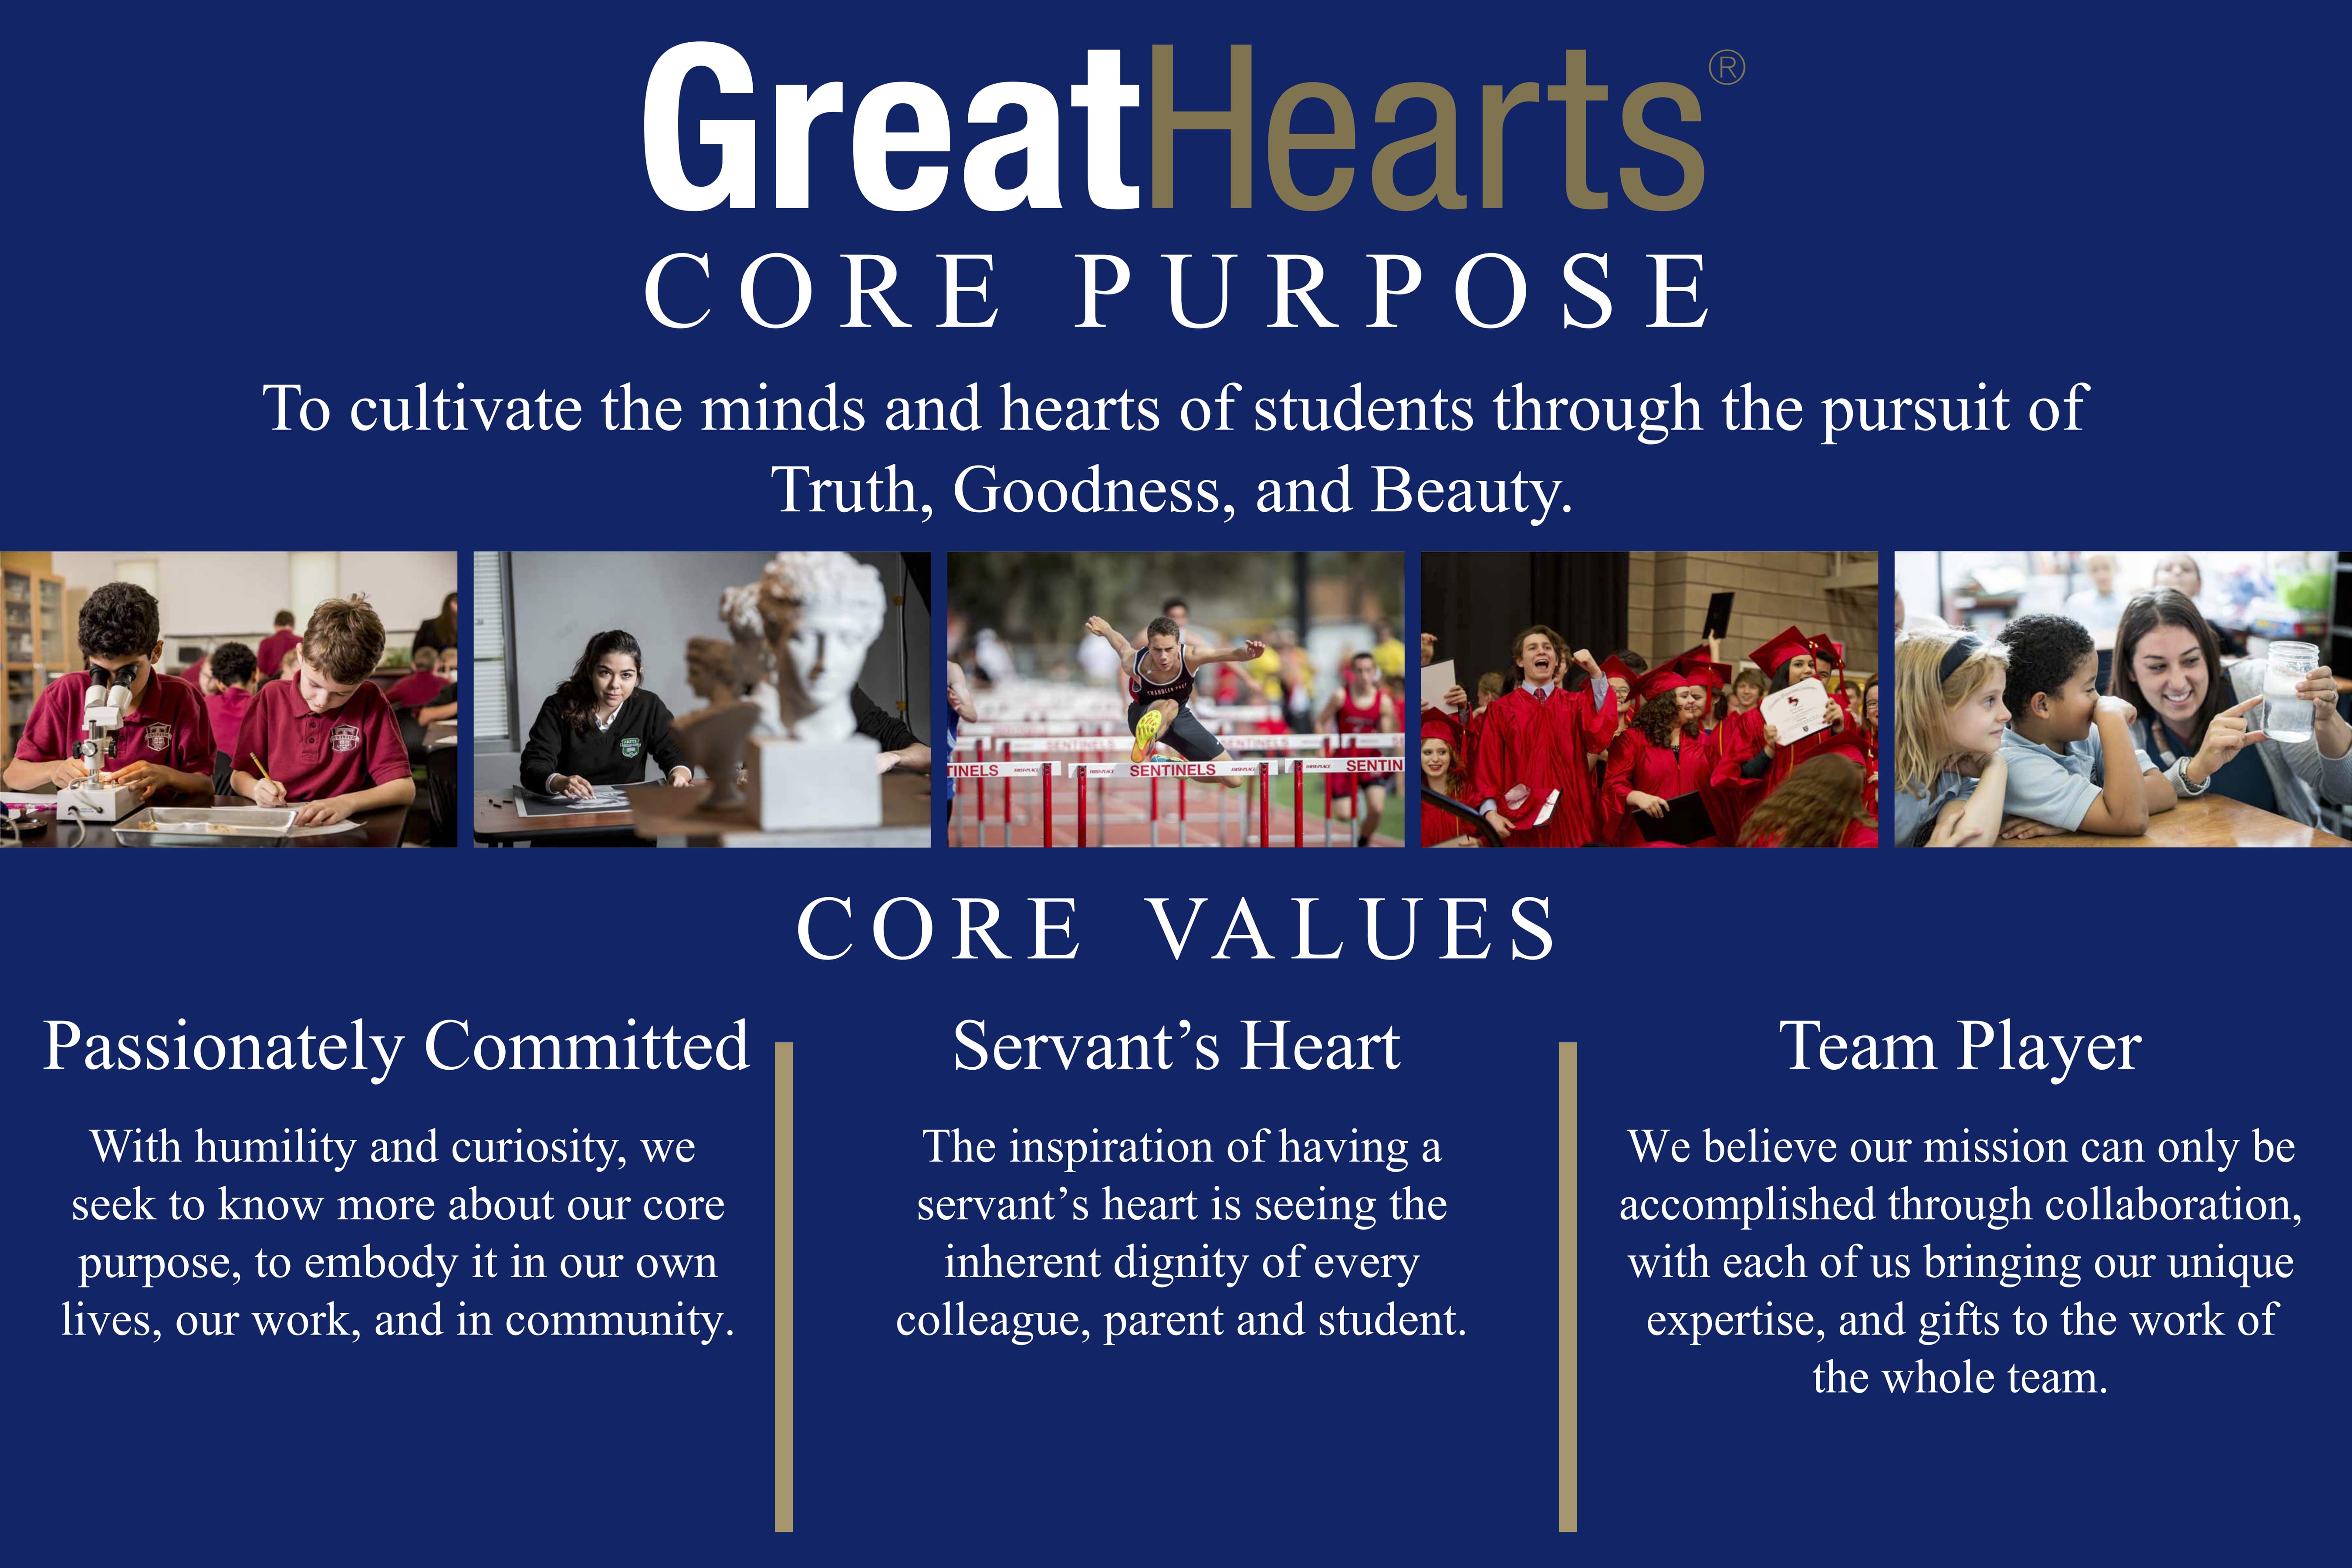 Great Hearts mission